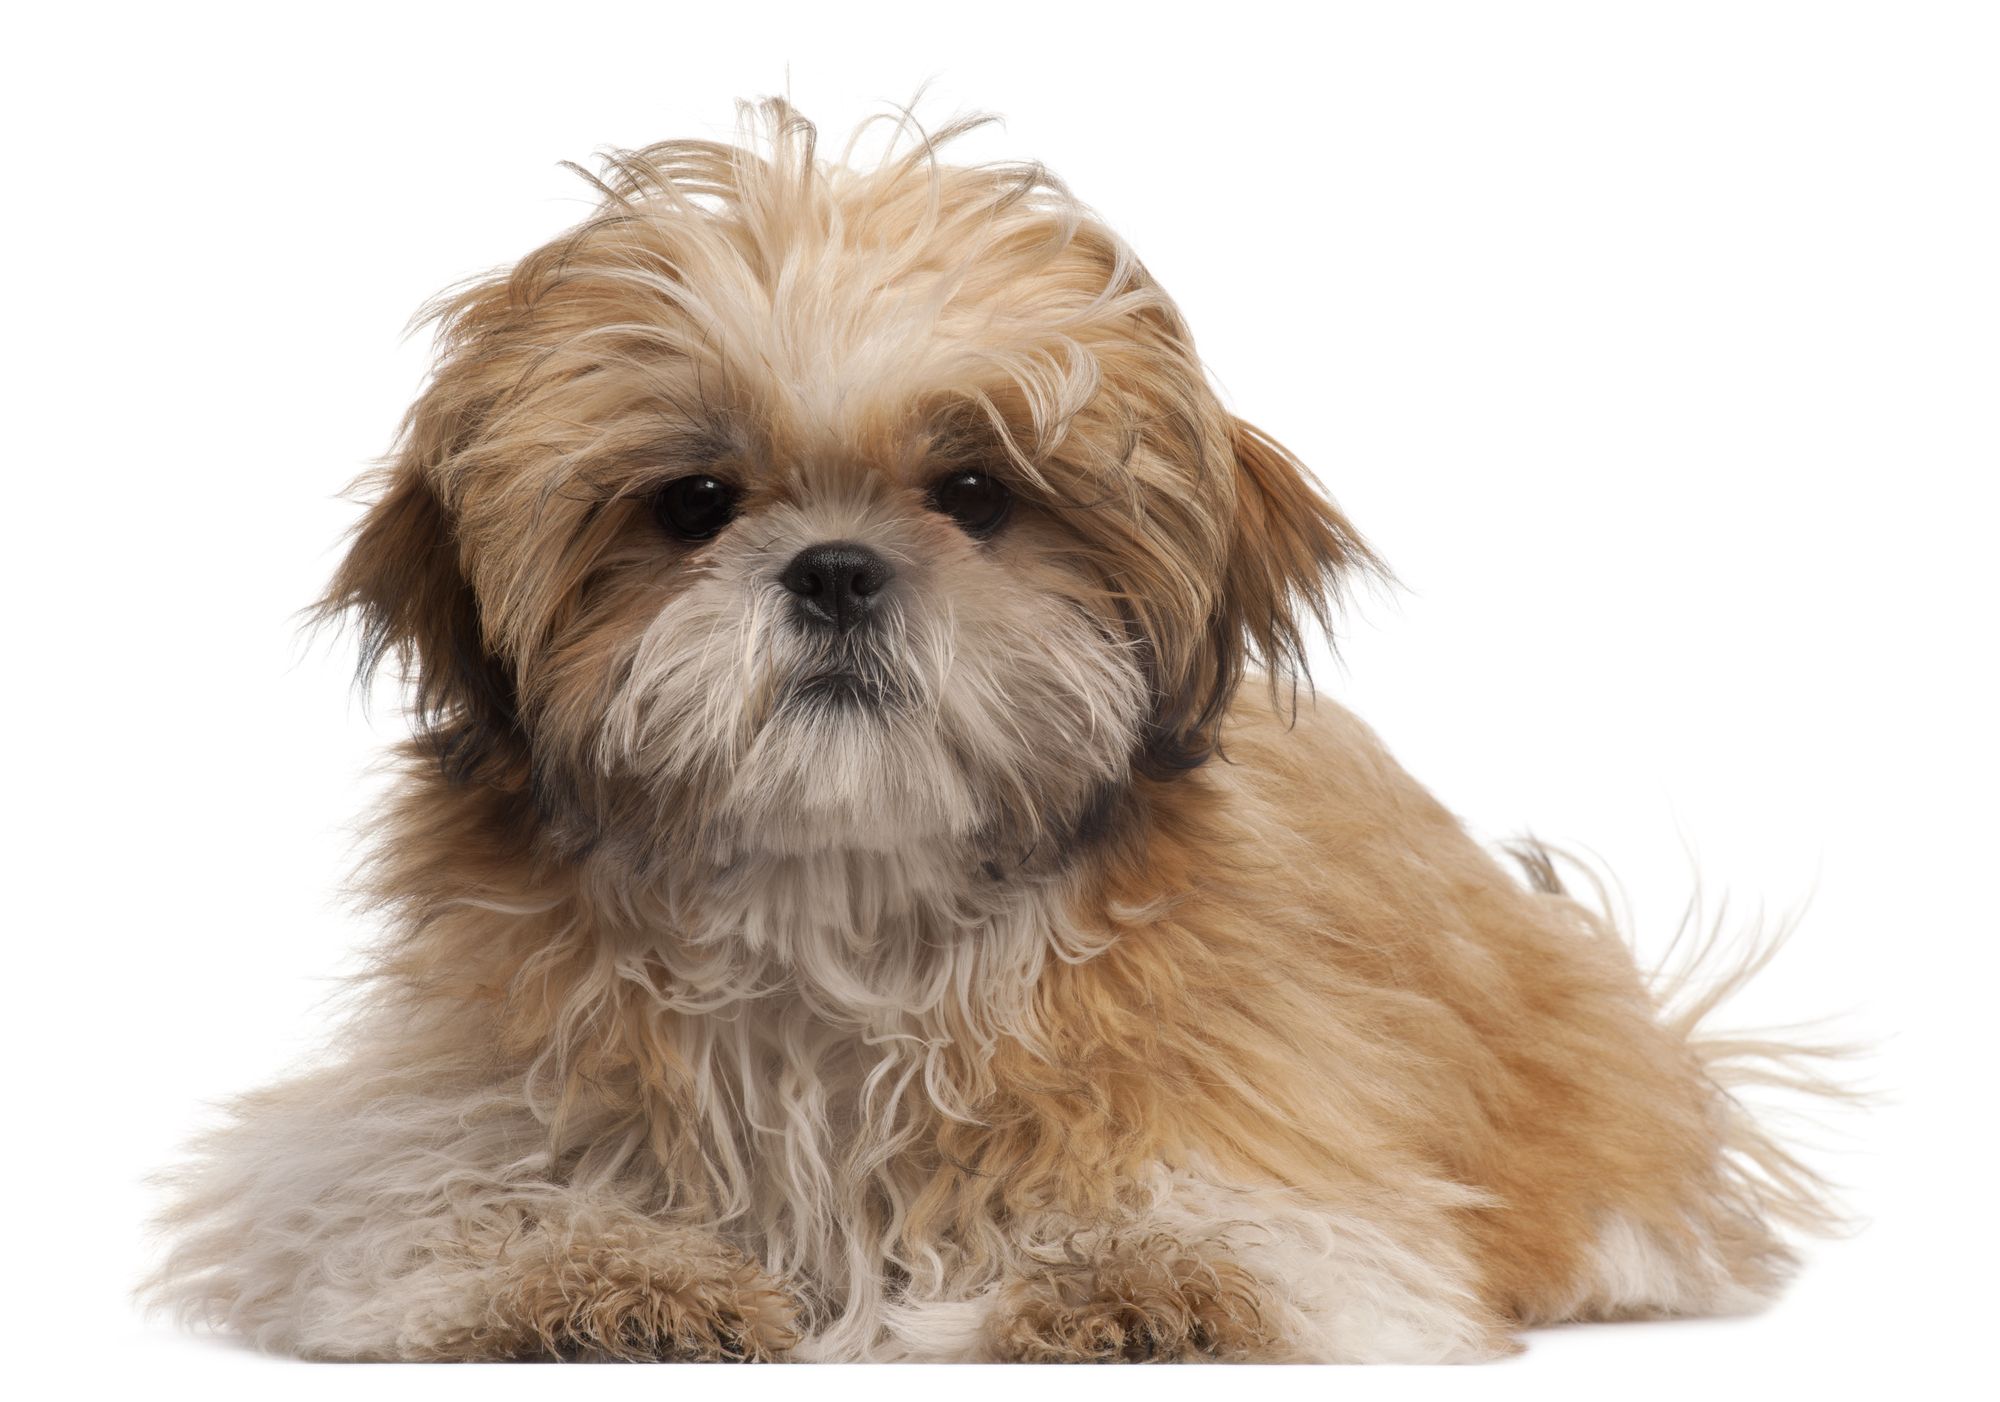 Shih-tzu puppy, 6 months old, lying in front of white background